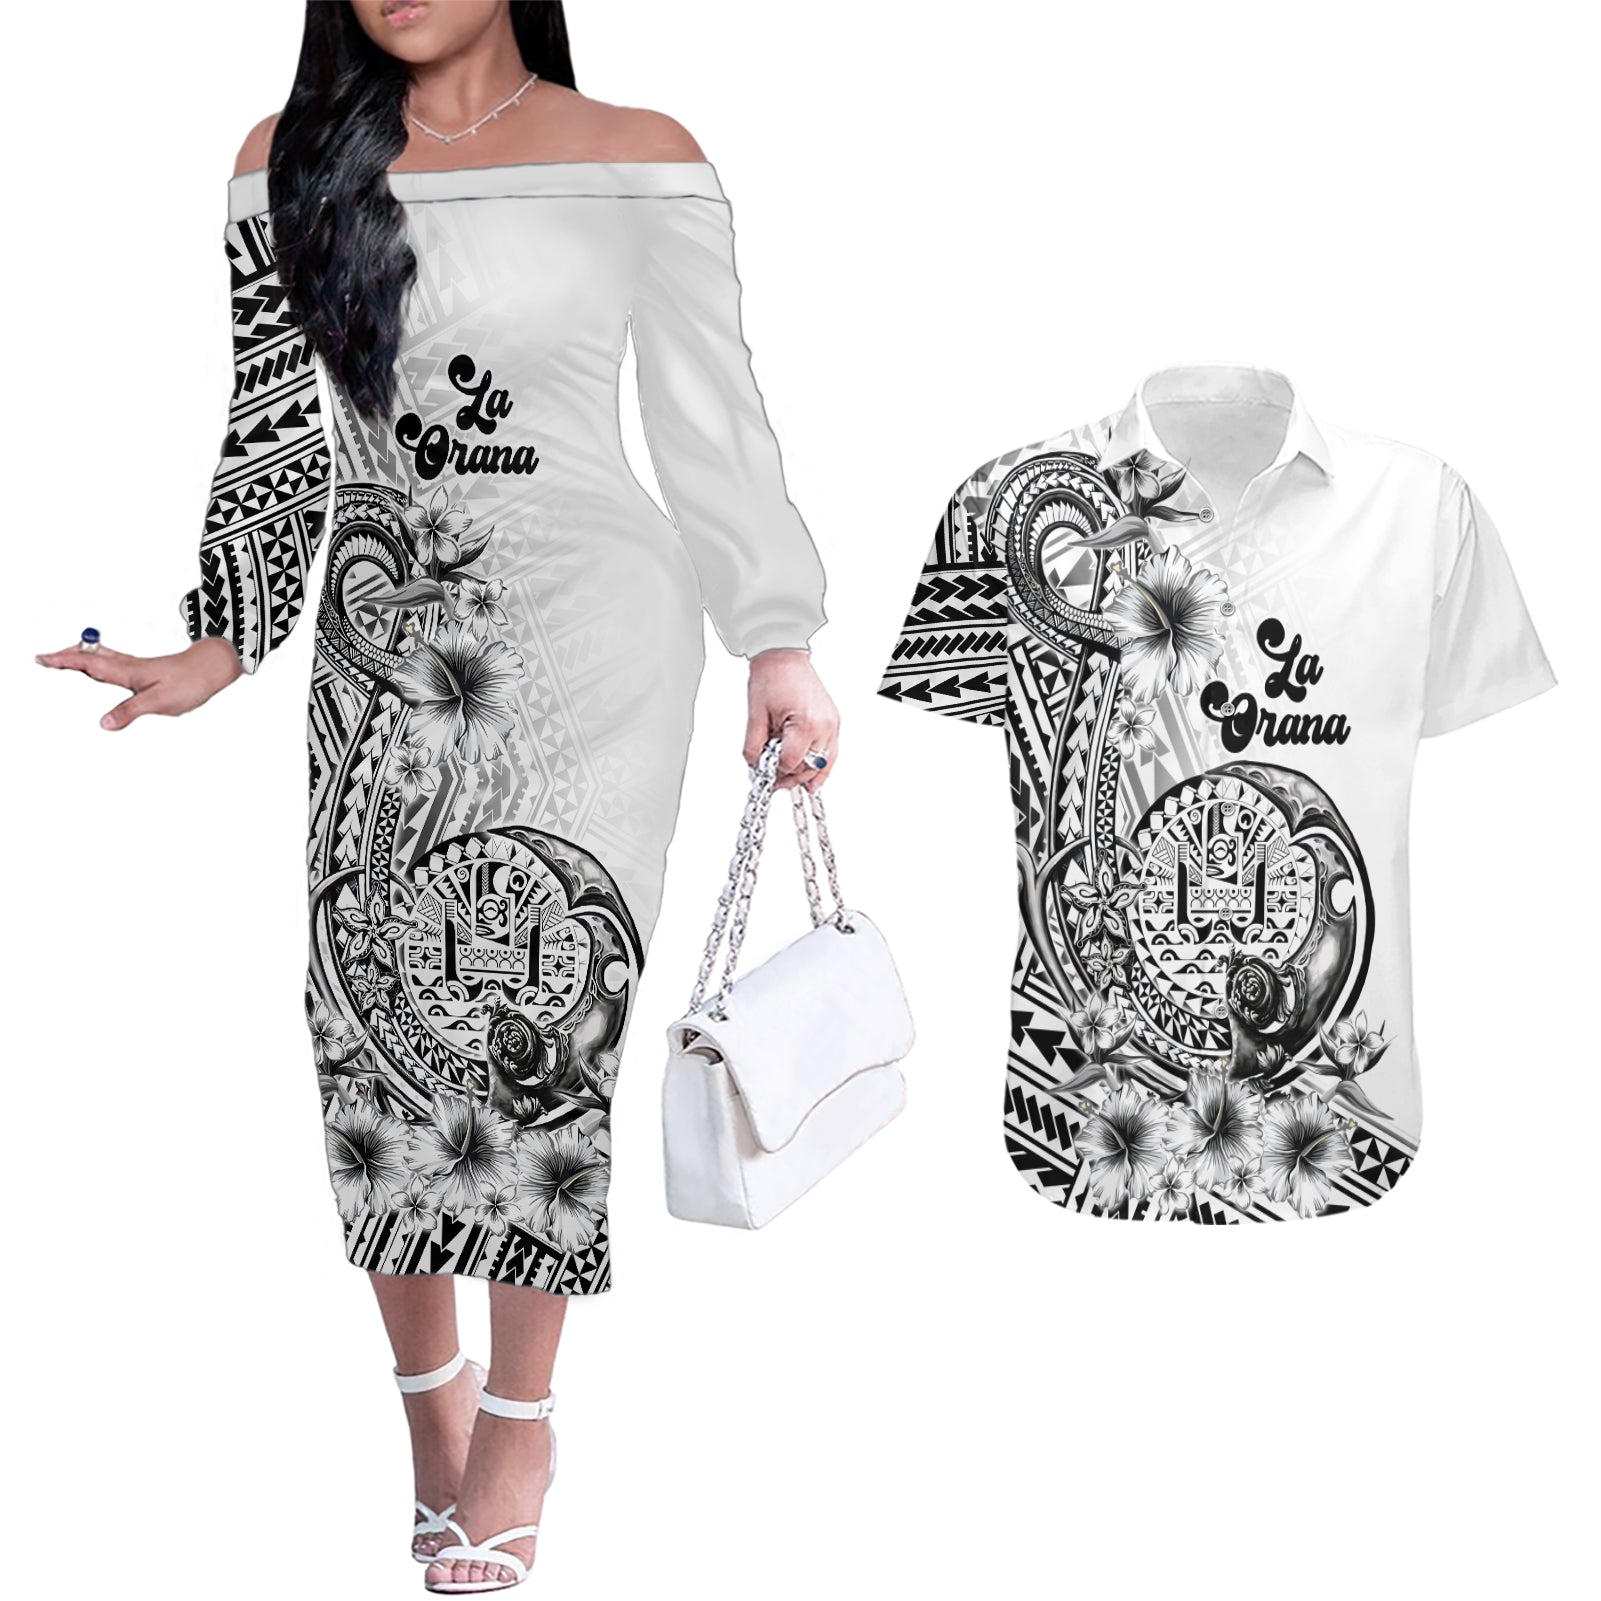 La Orana Tahiti Personalised Couples Matching Off The Shoulder Long Sleeve Dress and Hawaiian Shirt French Polynesia Hook Tattoo Special White Color LT9 White - Polynesian Pride